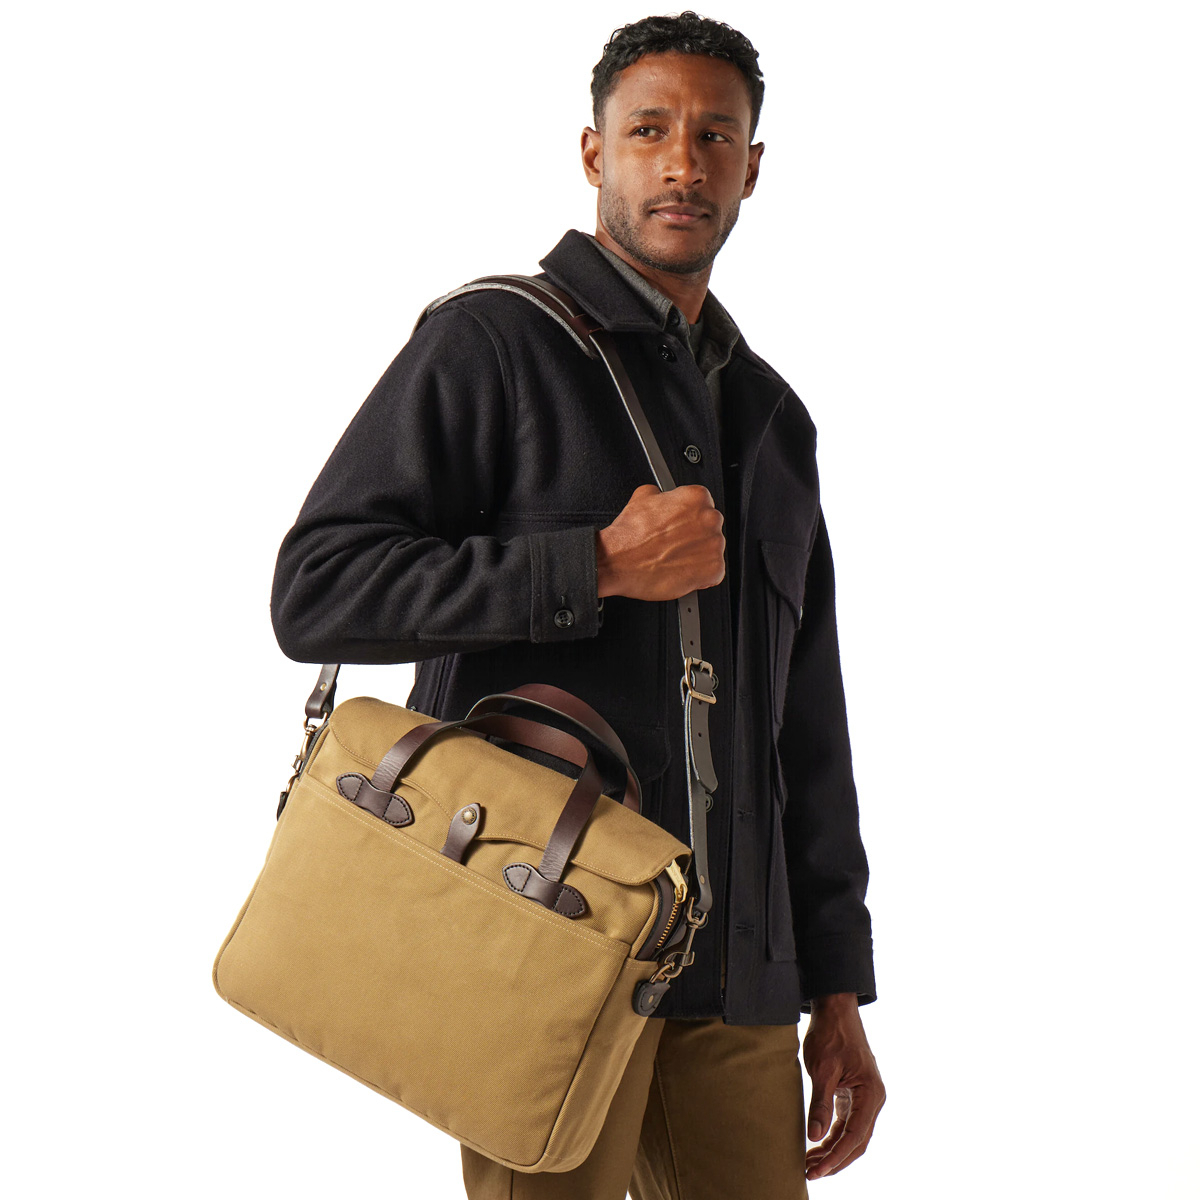 Filson Original Briefcase Tan, perfect bag with style and character